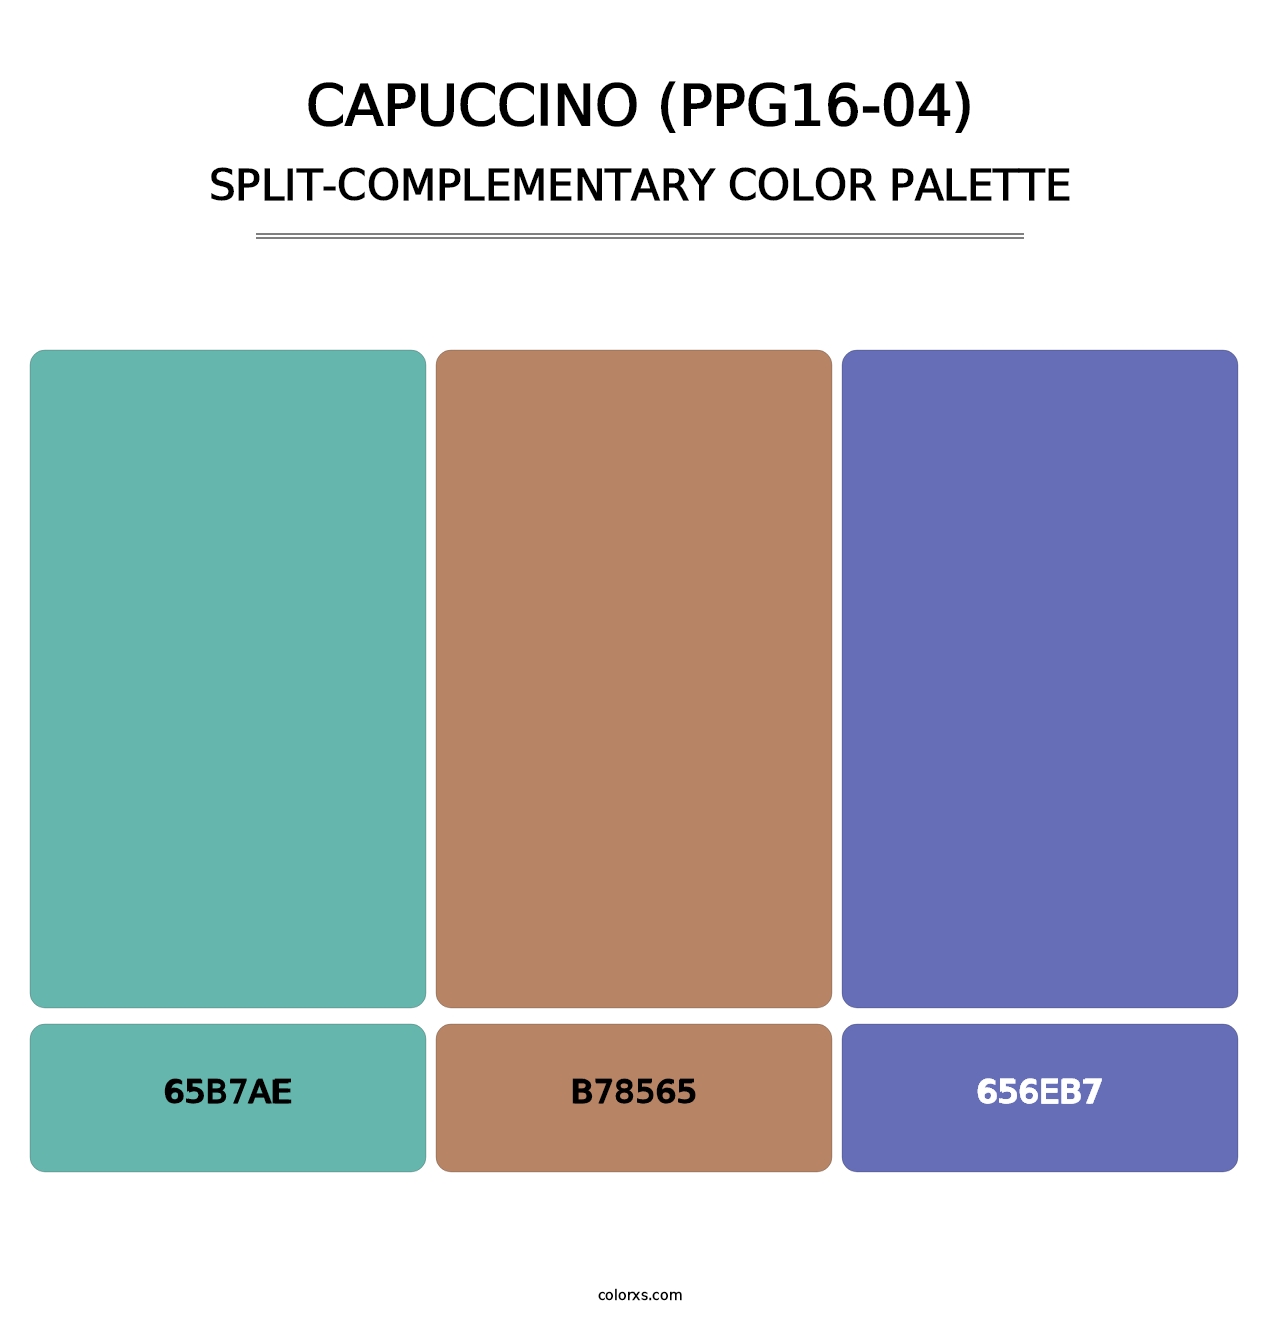 Capuccino (PPG16-04) - Split-Complementary Color Palette